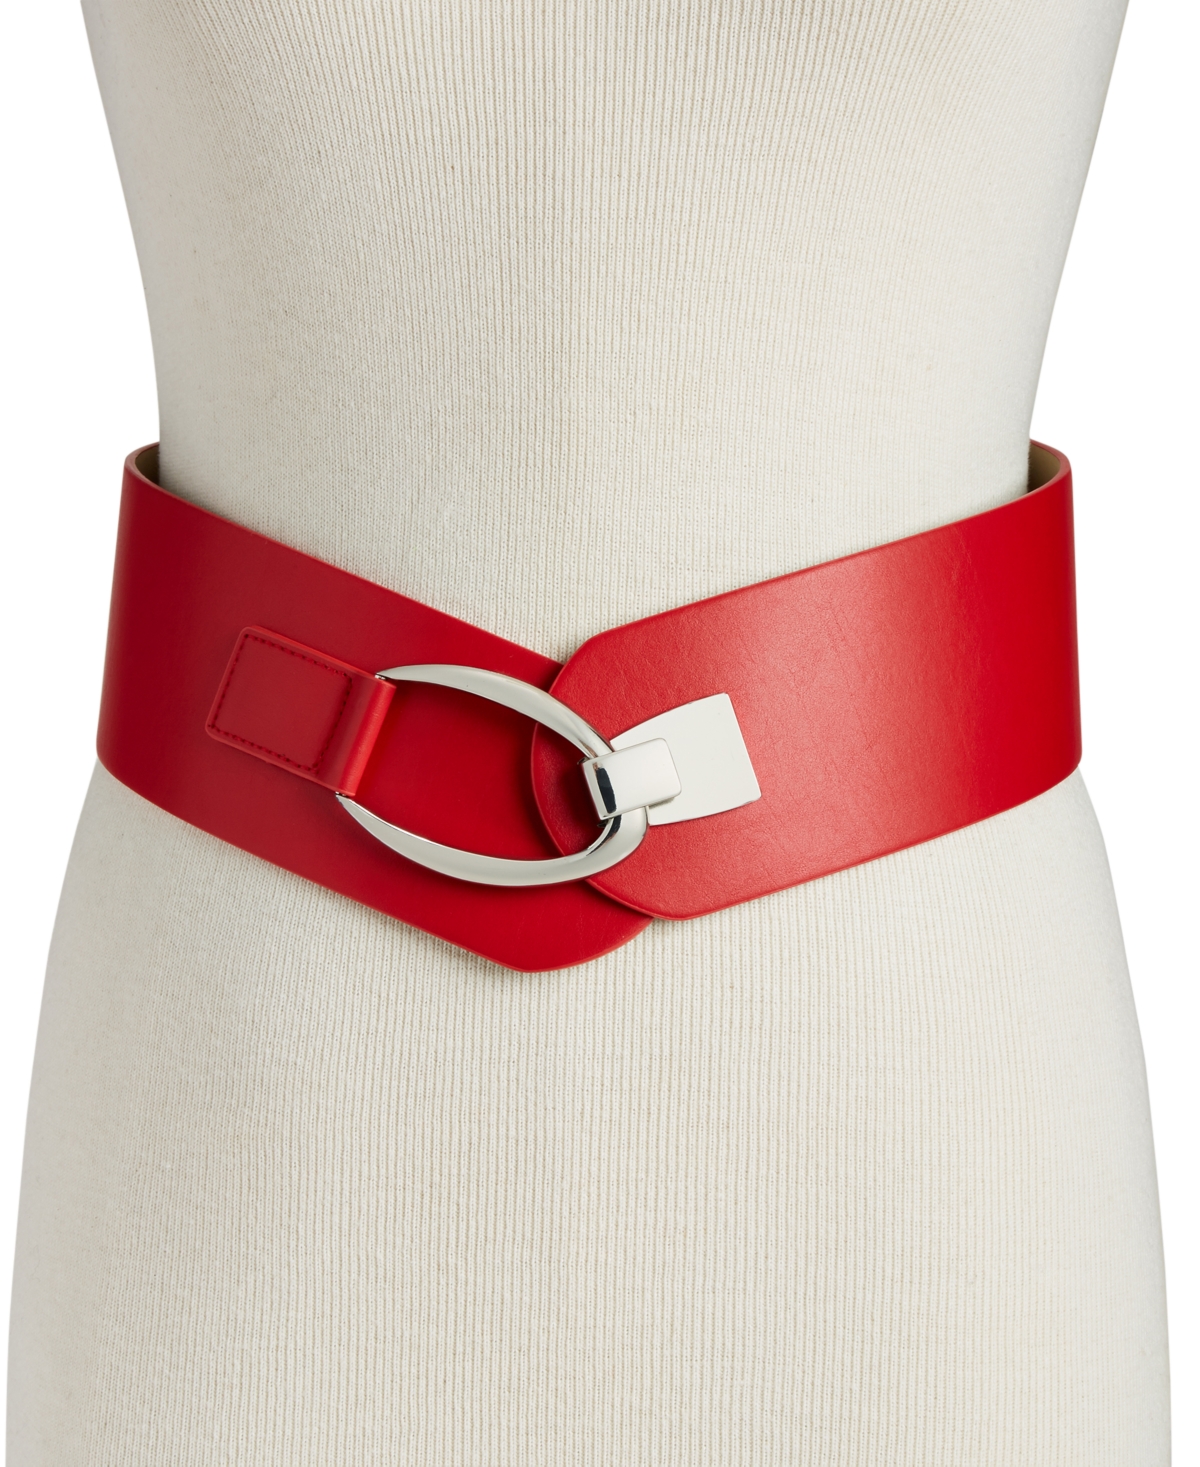 Inc International Concepts Interlocking-hook Stretch Belt, Created For Macy's In Red